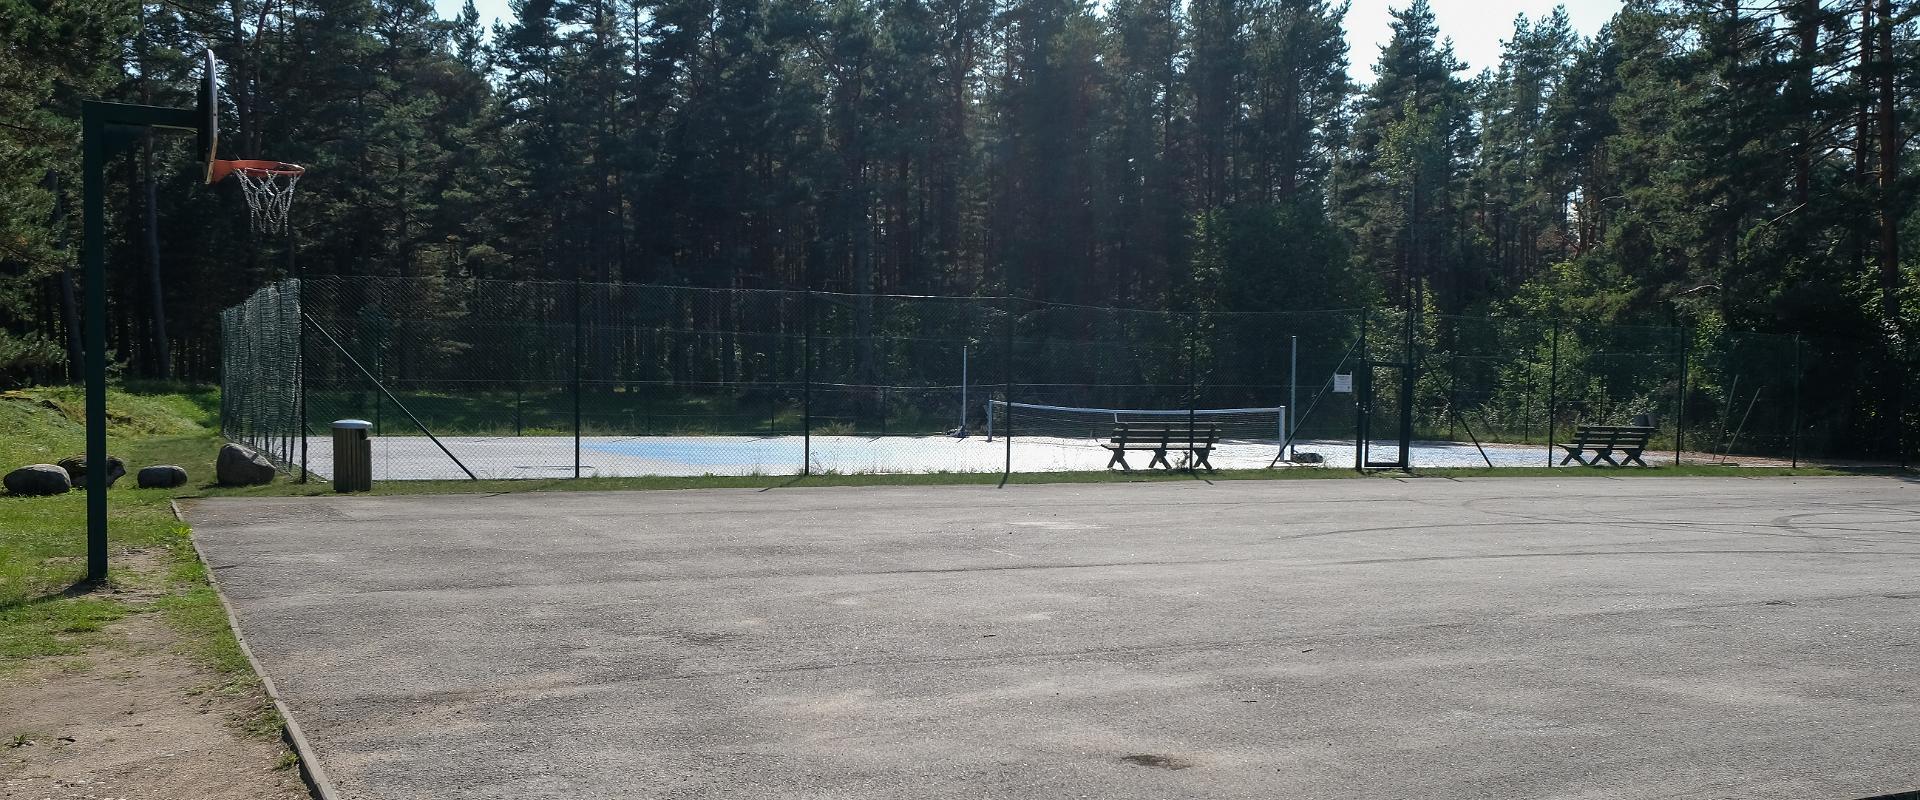 Tennis court and soccer field of the former community centre on Kihnu